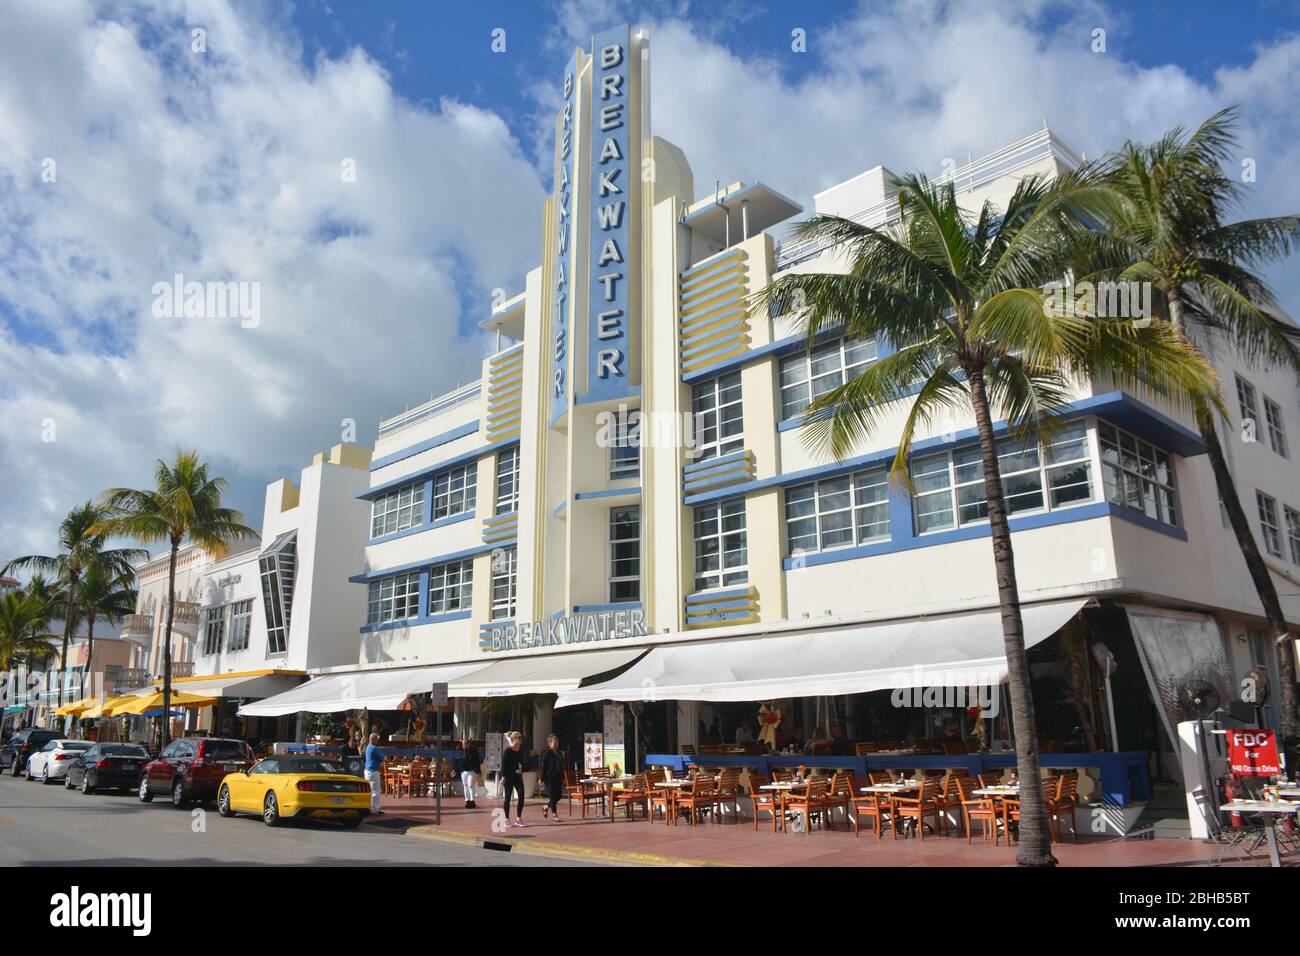 The Breakwater hotel on Ocean Drive. The world's largest collection of Art Deco architecture is in South Beach, part of Miami Beach, Florida, USA. Stock Photo